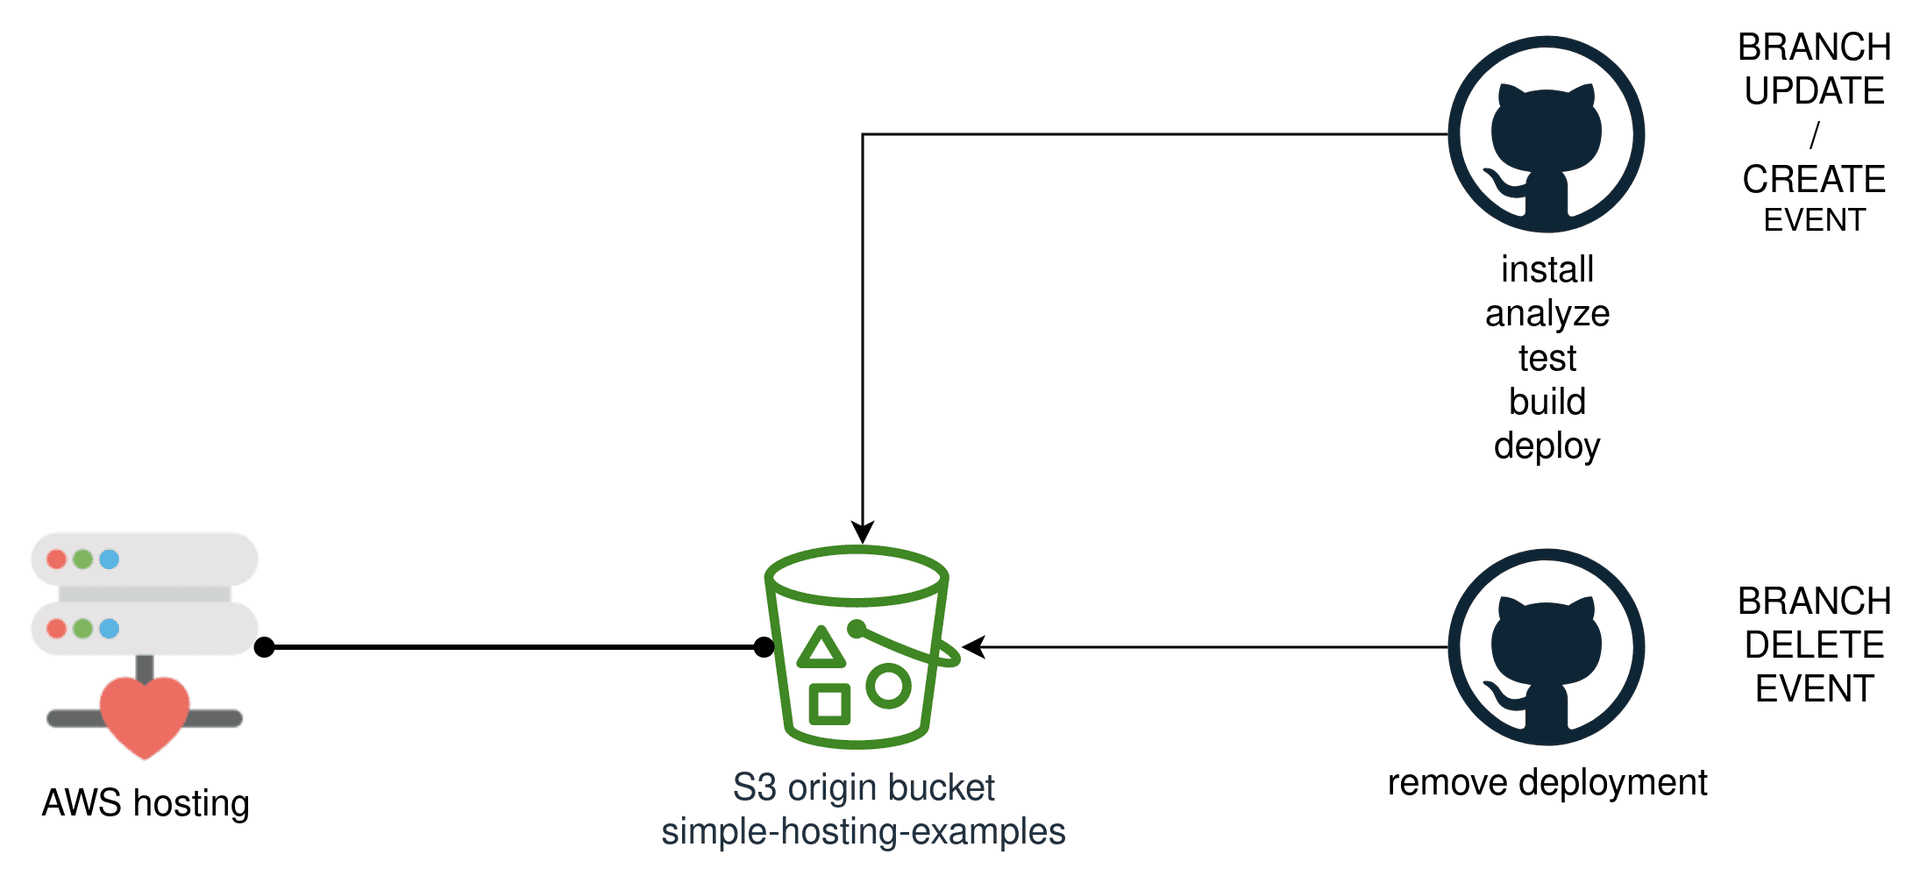 GitHub Actions deliver artifacts to the S3 hosting origin bucket